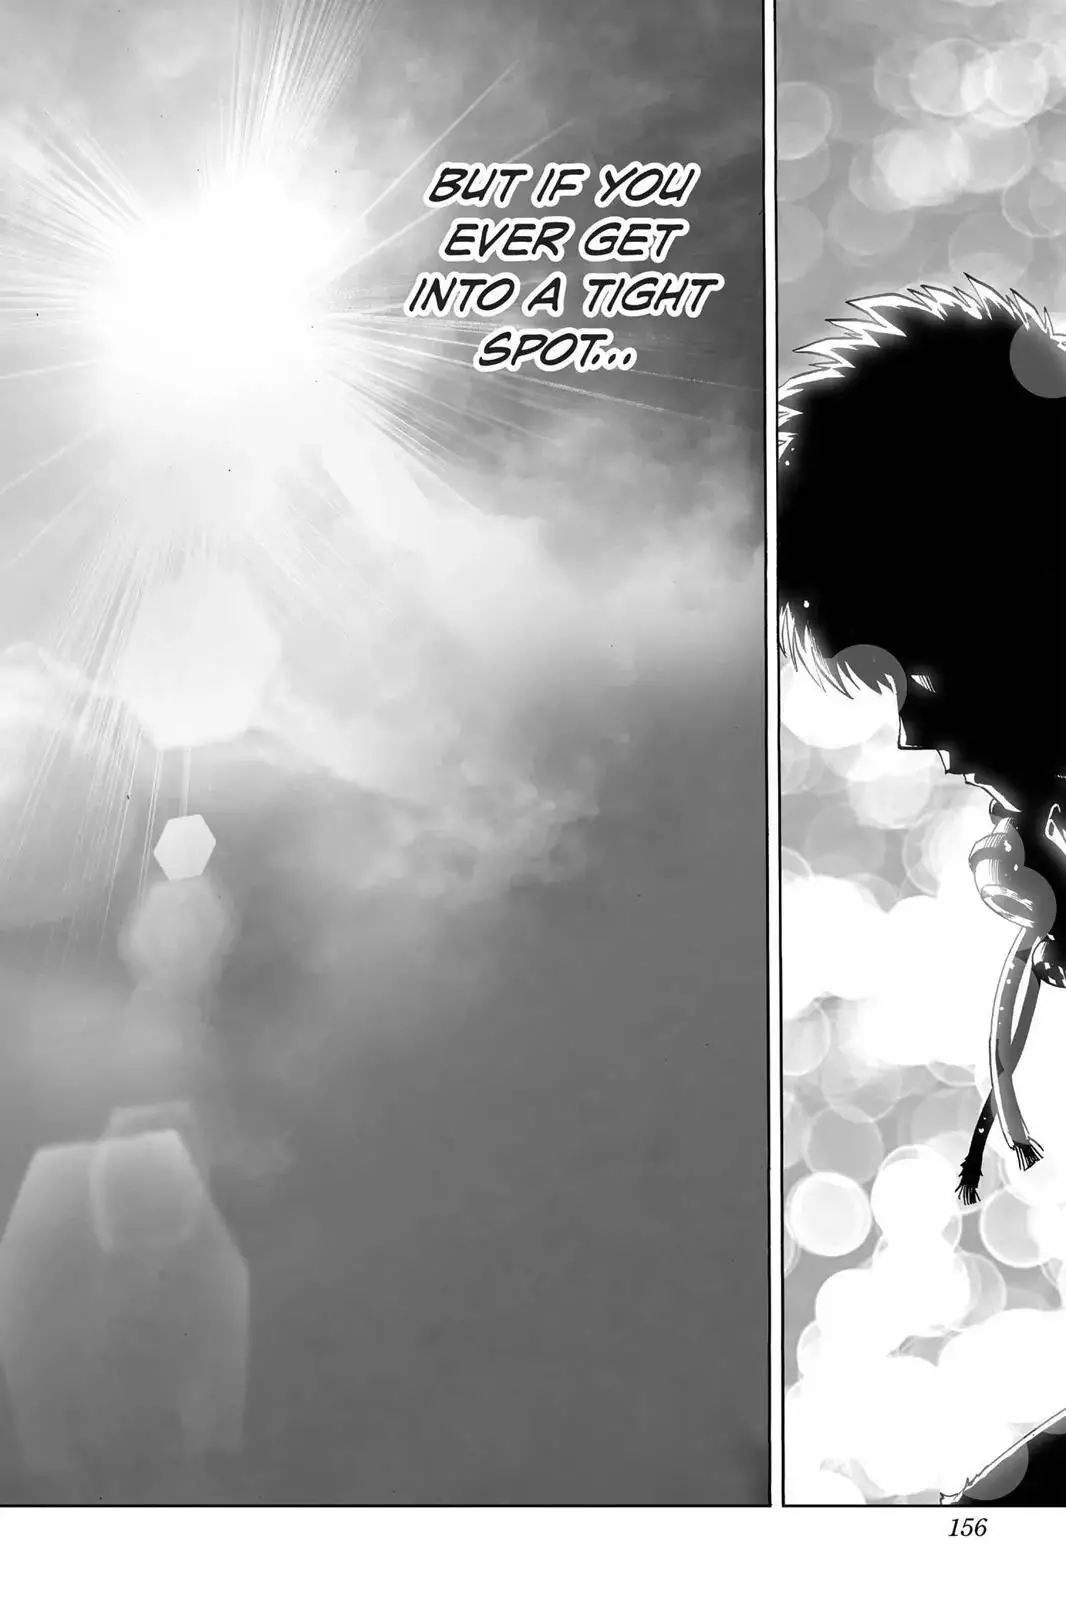 One Punch Man Chapter 28, READ One Punch Man Chapter 28 ONLINE, lost in the cloud genre,lost in the cloud gif,lost in the cloud girl,lost in the cloud goods,lost in the cloud goodreads,lost in the cloud,lost ark cloud gaming,lost odyssey cloud gaming,lost in the cloud fanart,lost in the cloud fanfic,lost in the cloud fandom,lost in the cloud first kiss,lost in the cloud font,lost in the cloud ending,lost in the cloud episode 97,lost in the cloud edit,lost in the cloud explained,lost in the cloud dog,lost in the cloud discord server,lost in the cloud desktop wallpaper,lost in the cloud drawing,can't find my cloud on network,lost in the cloud characters,lost in the cloud chapter 93 release date,lost in the cloud birthday,lost in the cloud birthday art,lost in the cloud background,lost in the cloud banner,lost in the clouds meaning,what is the black cloud in lost,lost in the cloud ao3,lost in the cloud anime,lost in the cloud art,lost in the cloud author twitter,lost in the cloud author instagram,lost in the cloud artist,lost in the cloud acrylic stand,lost in the cloud artist twitter,lost in the cloud art style,lost in the cloud analysis